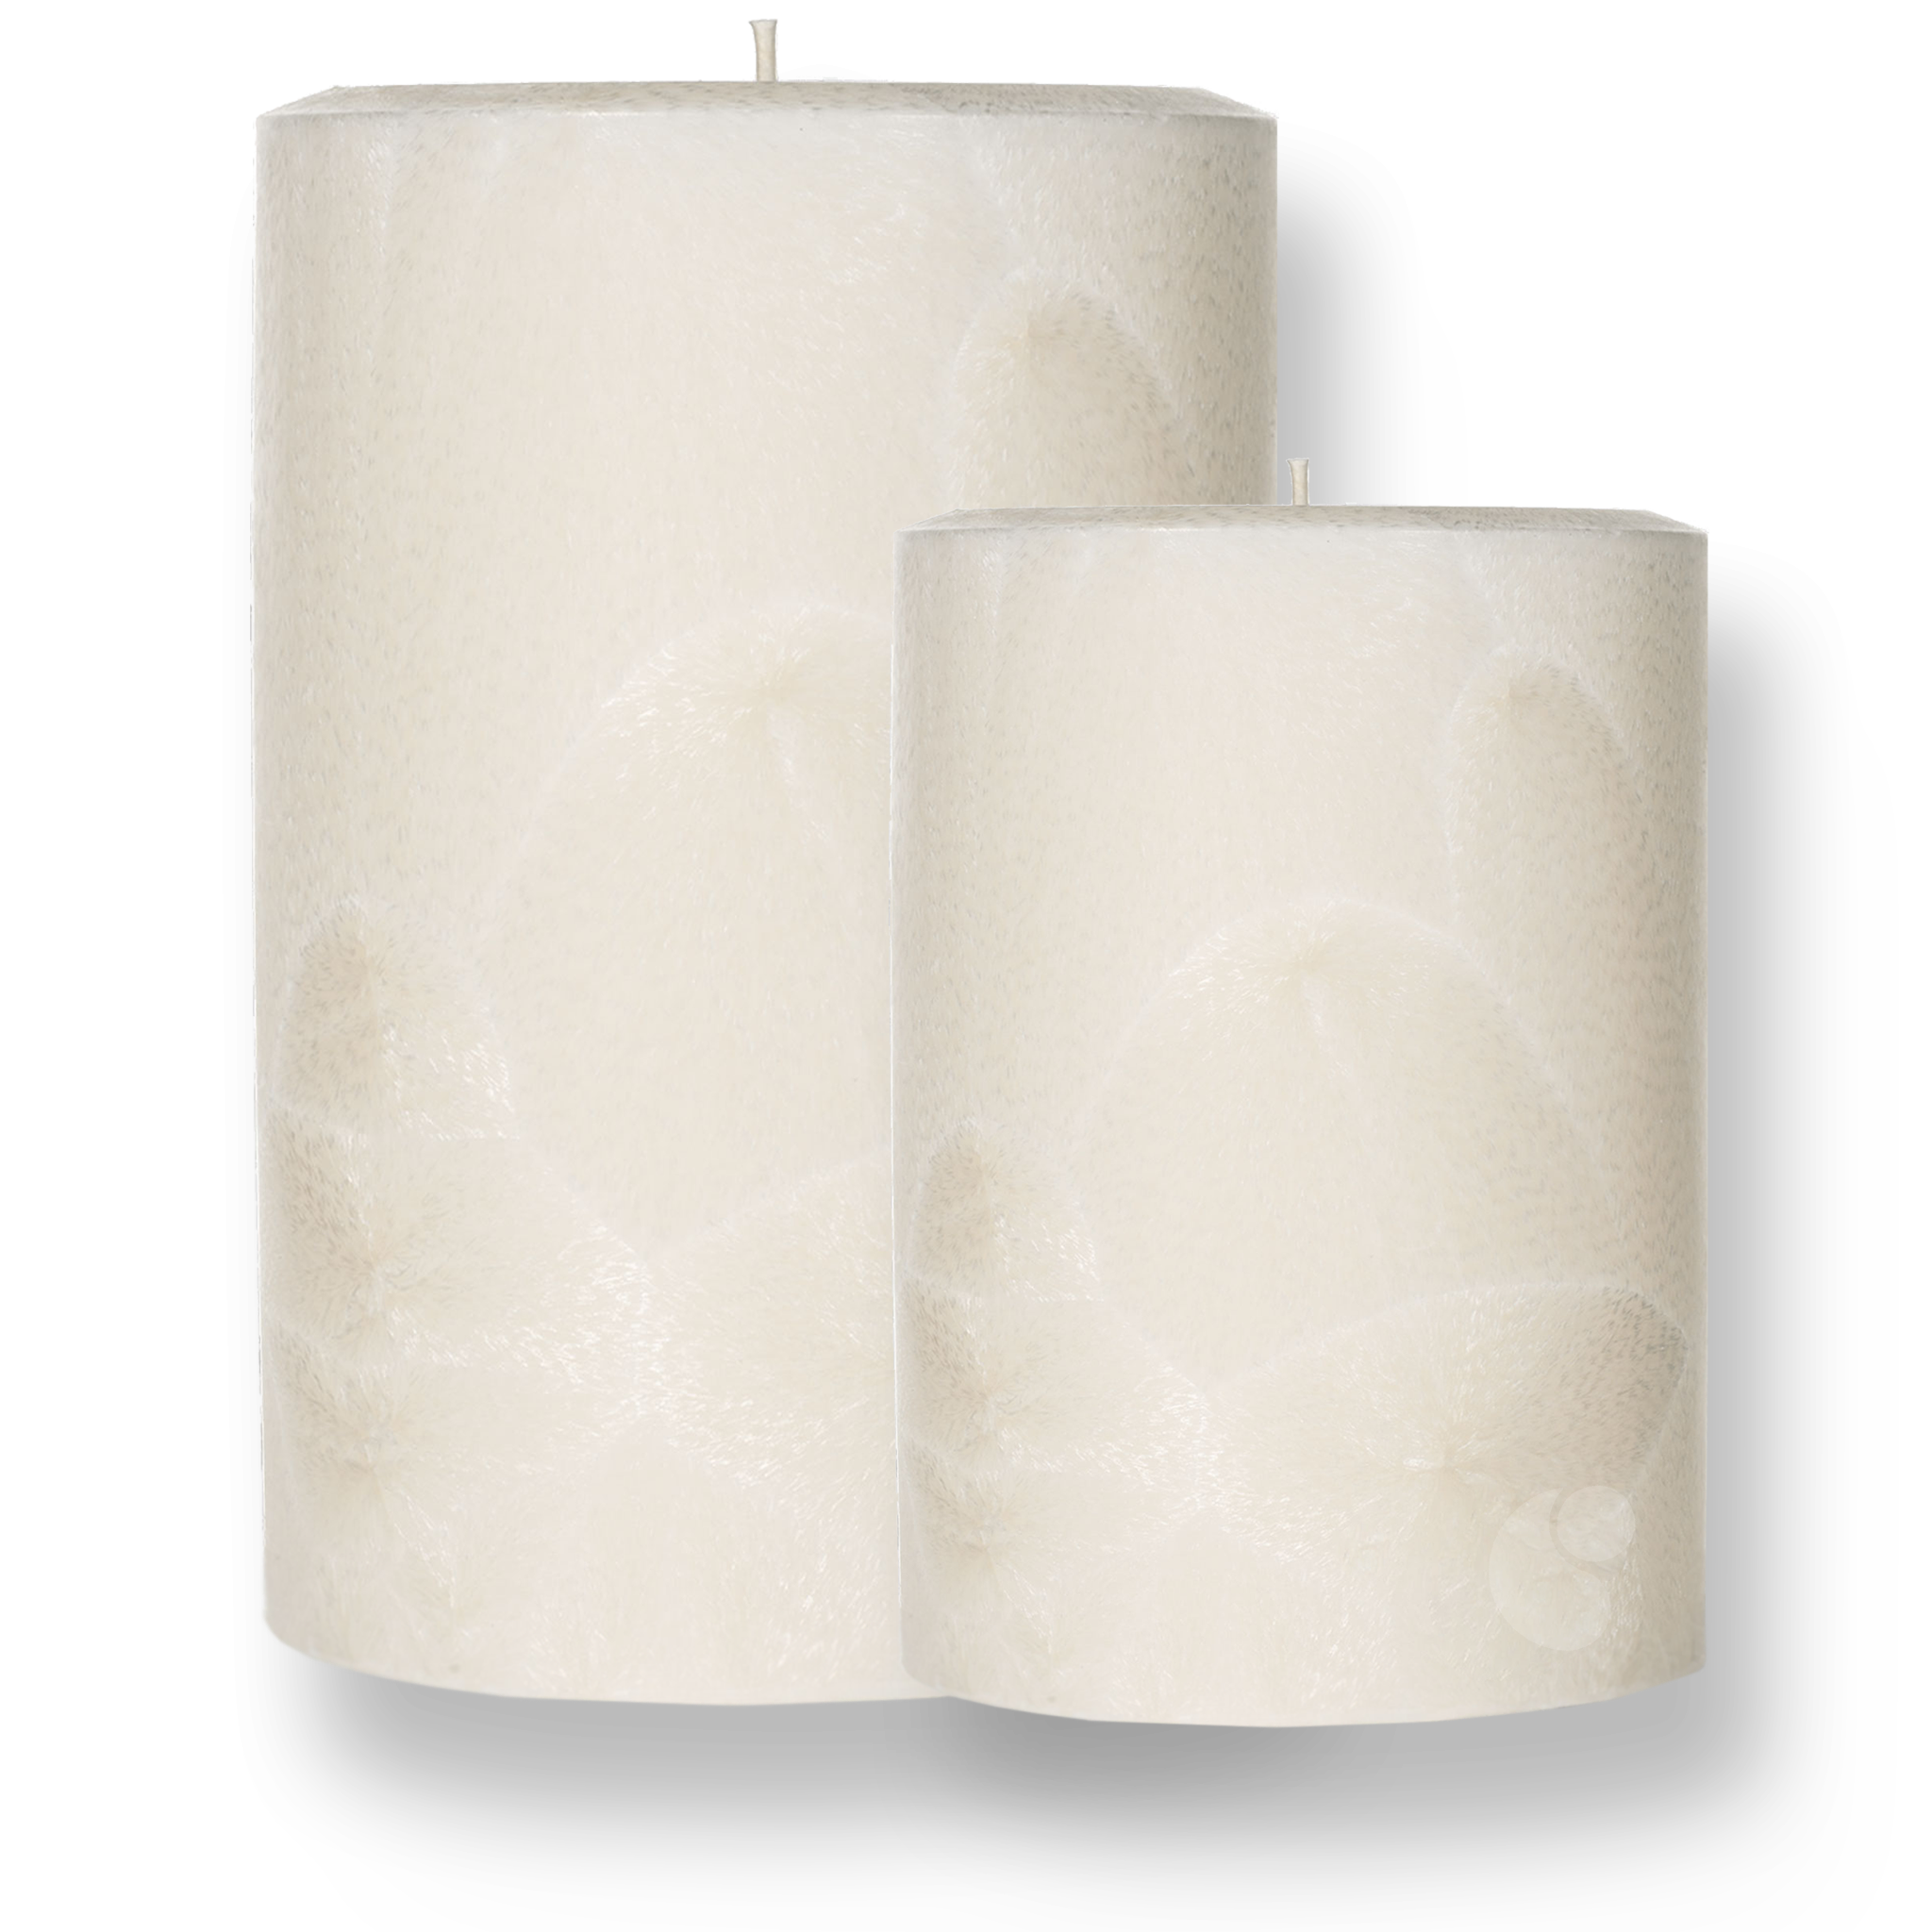 Cherry Pipe Tobacco · Pillar Candle